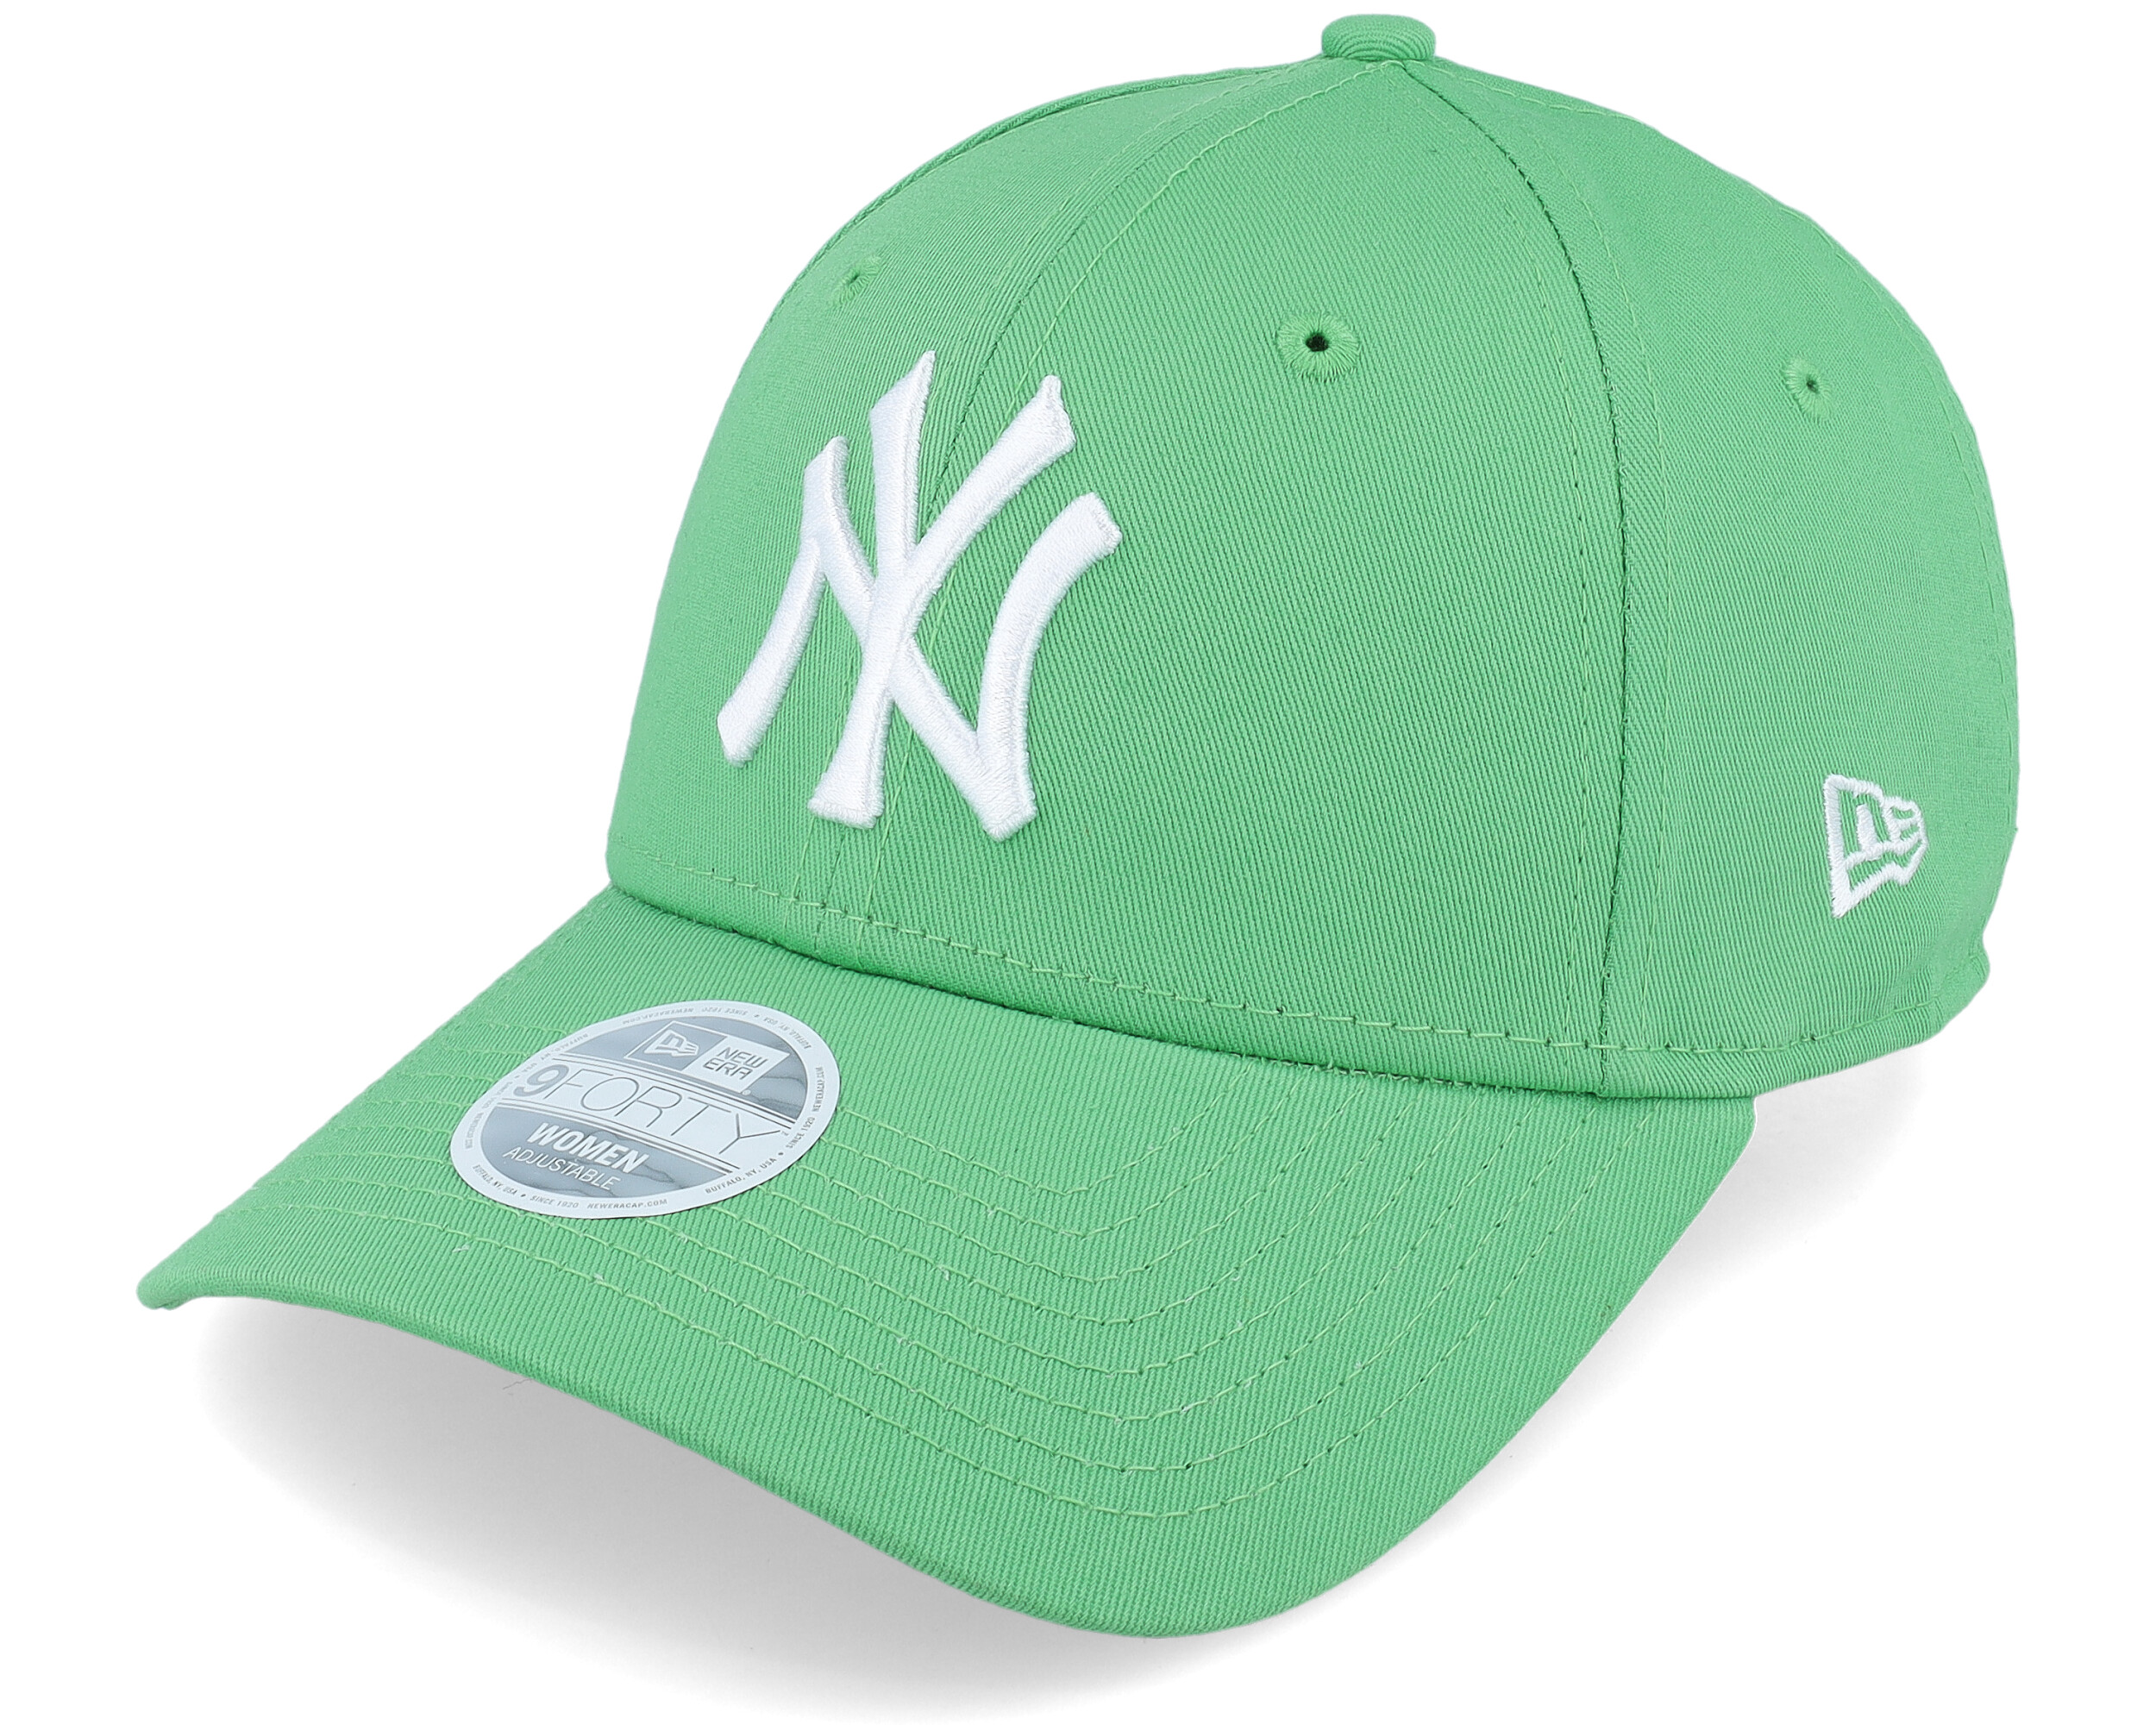 New York Yankees Womens Green 9FORTY Adjustable Cap